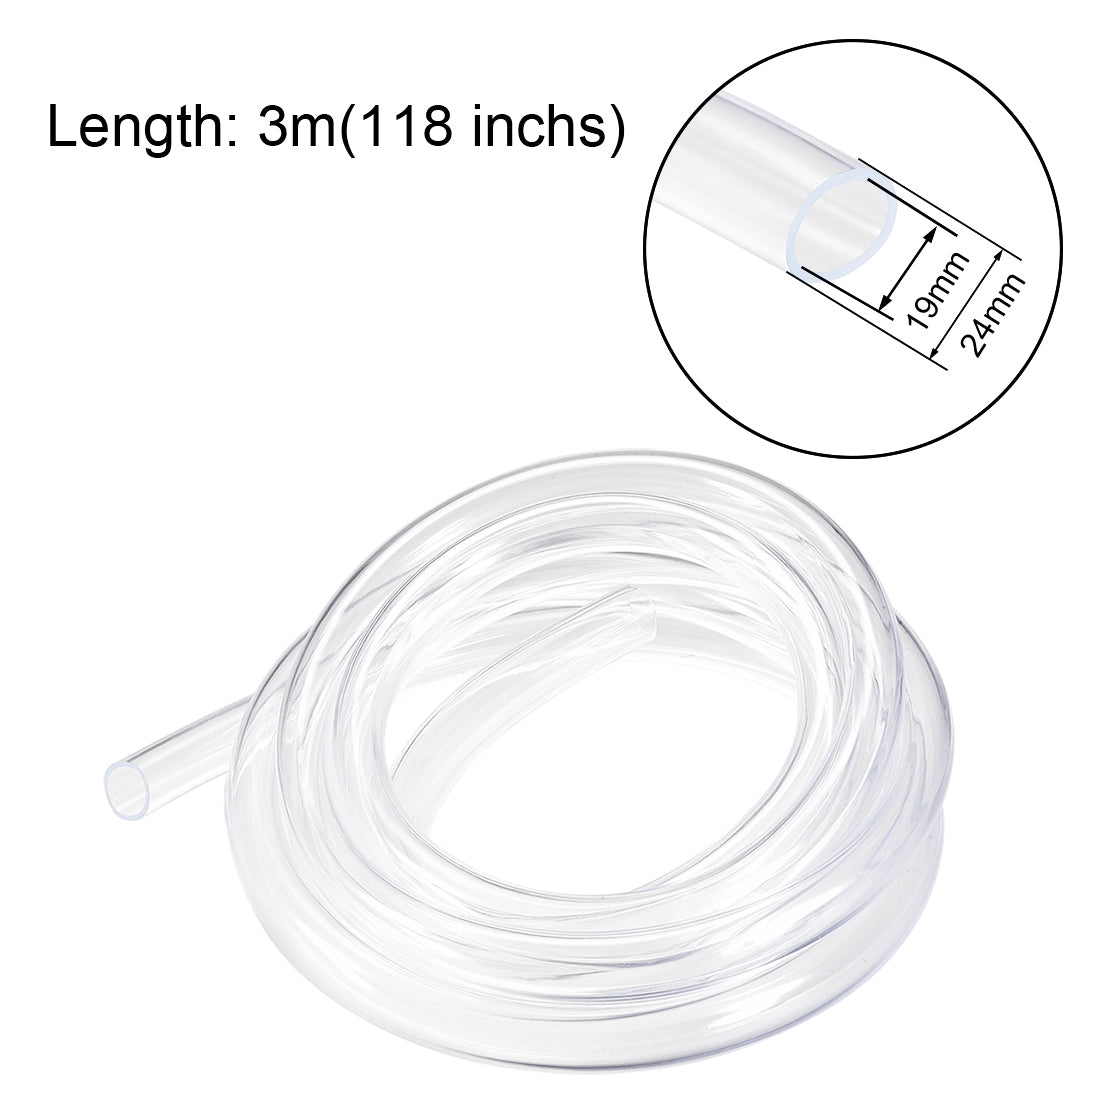 Uxcell Uxcell PVC Hose Tube, 8mm(0.31") ID x 10mm(0.39") OD 3 Meter Clear Vinyl Tubing